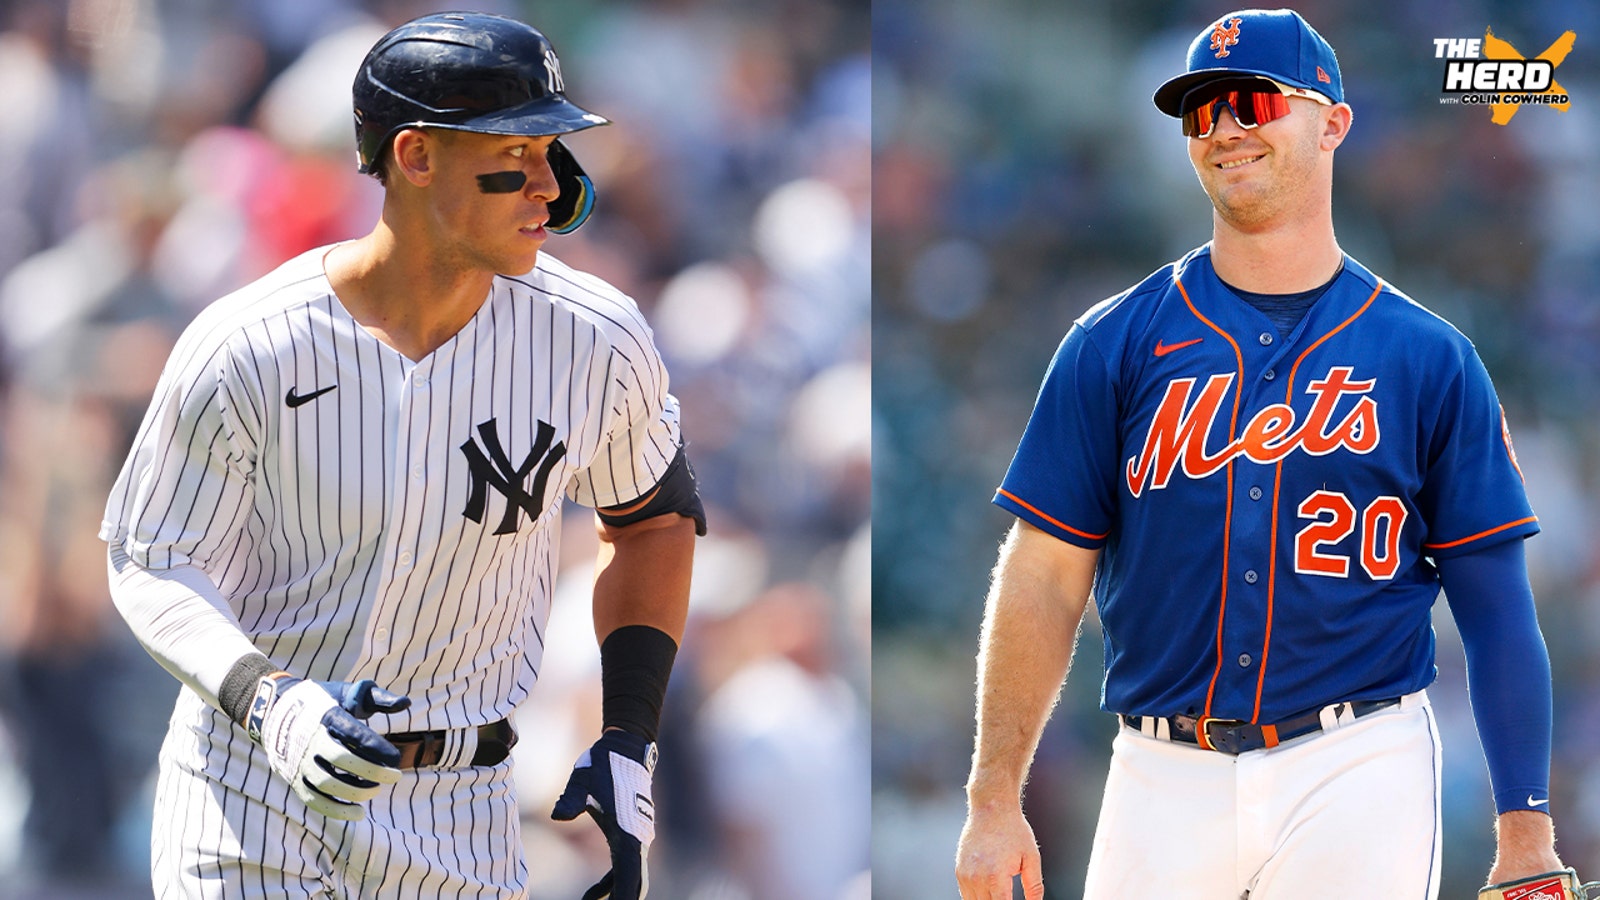 Yankees & Mets lead their divisions as the MLB All-Star Game approaches | THE HERD